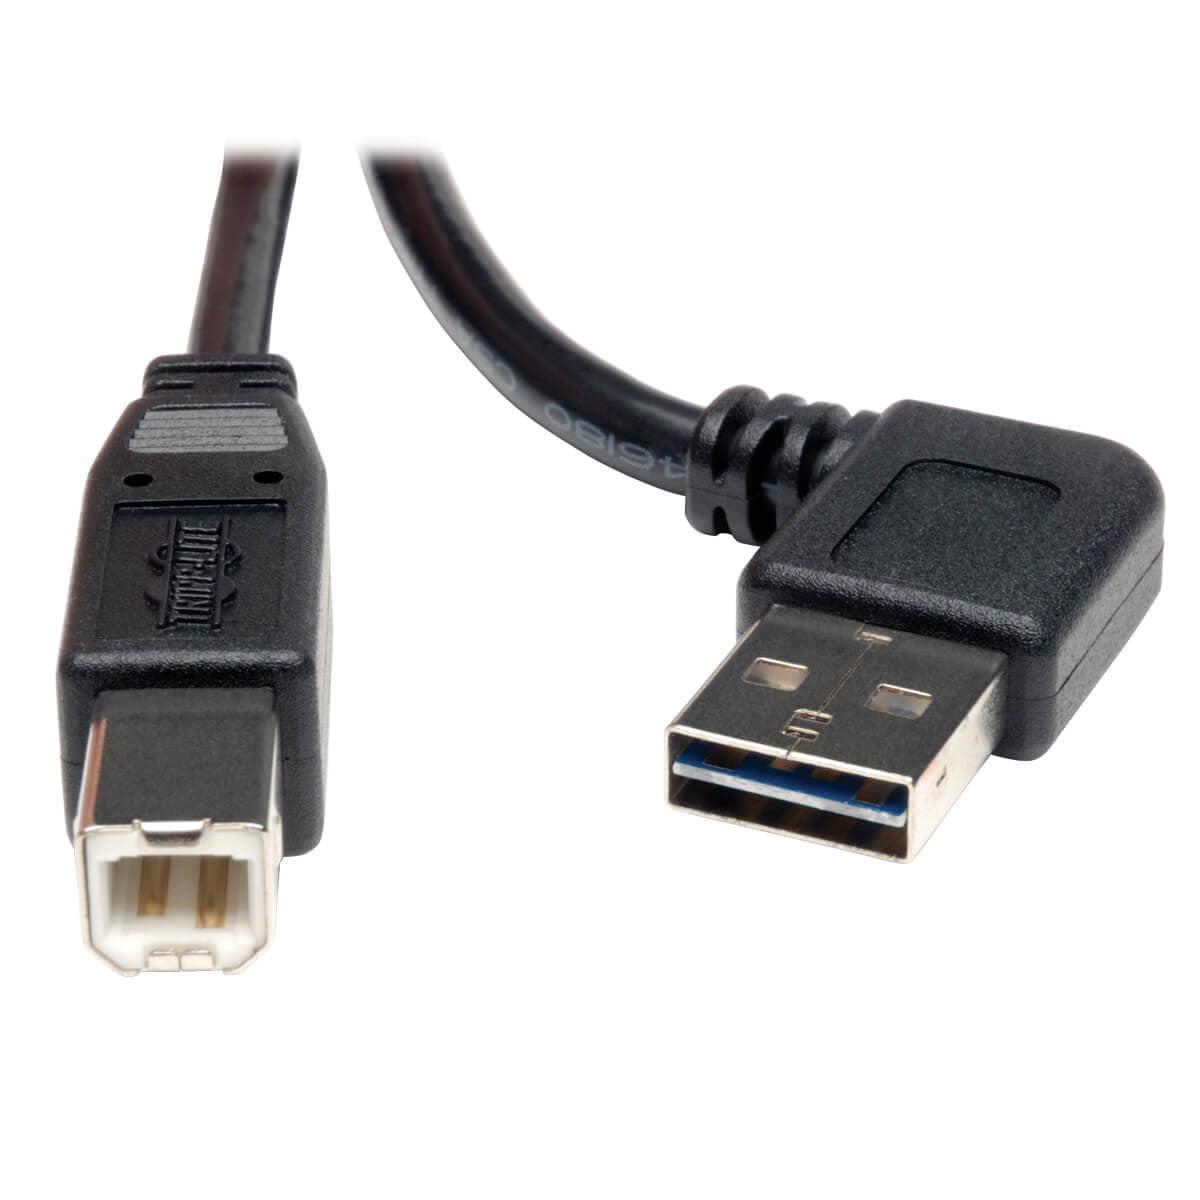 Tripp Lite Ur022-006-Ra Universal Reversible Usb 2.0 Cable (Right / Left-Angle Reversible A To B M/M), 6 Ft. (1.83 M)